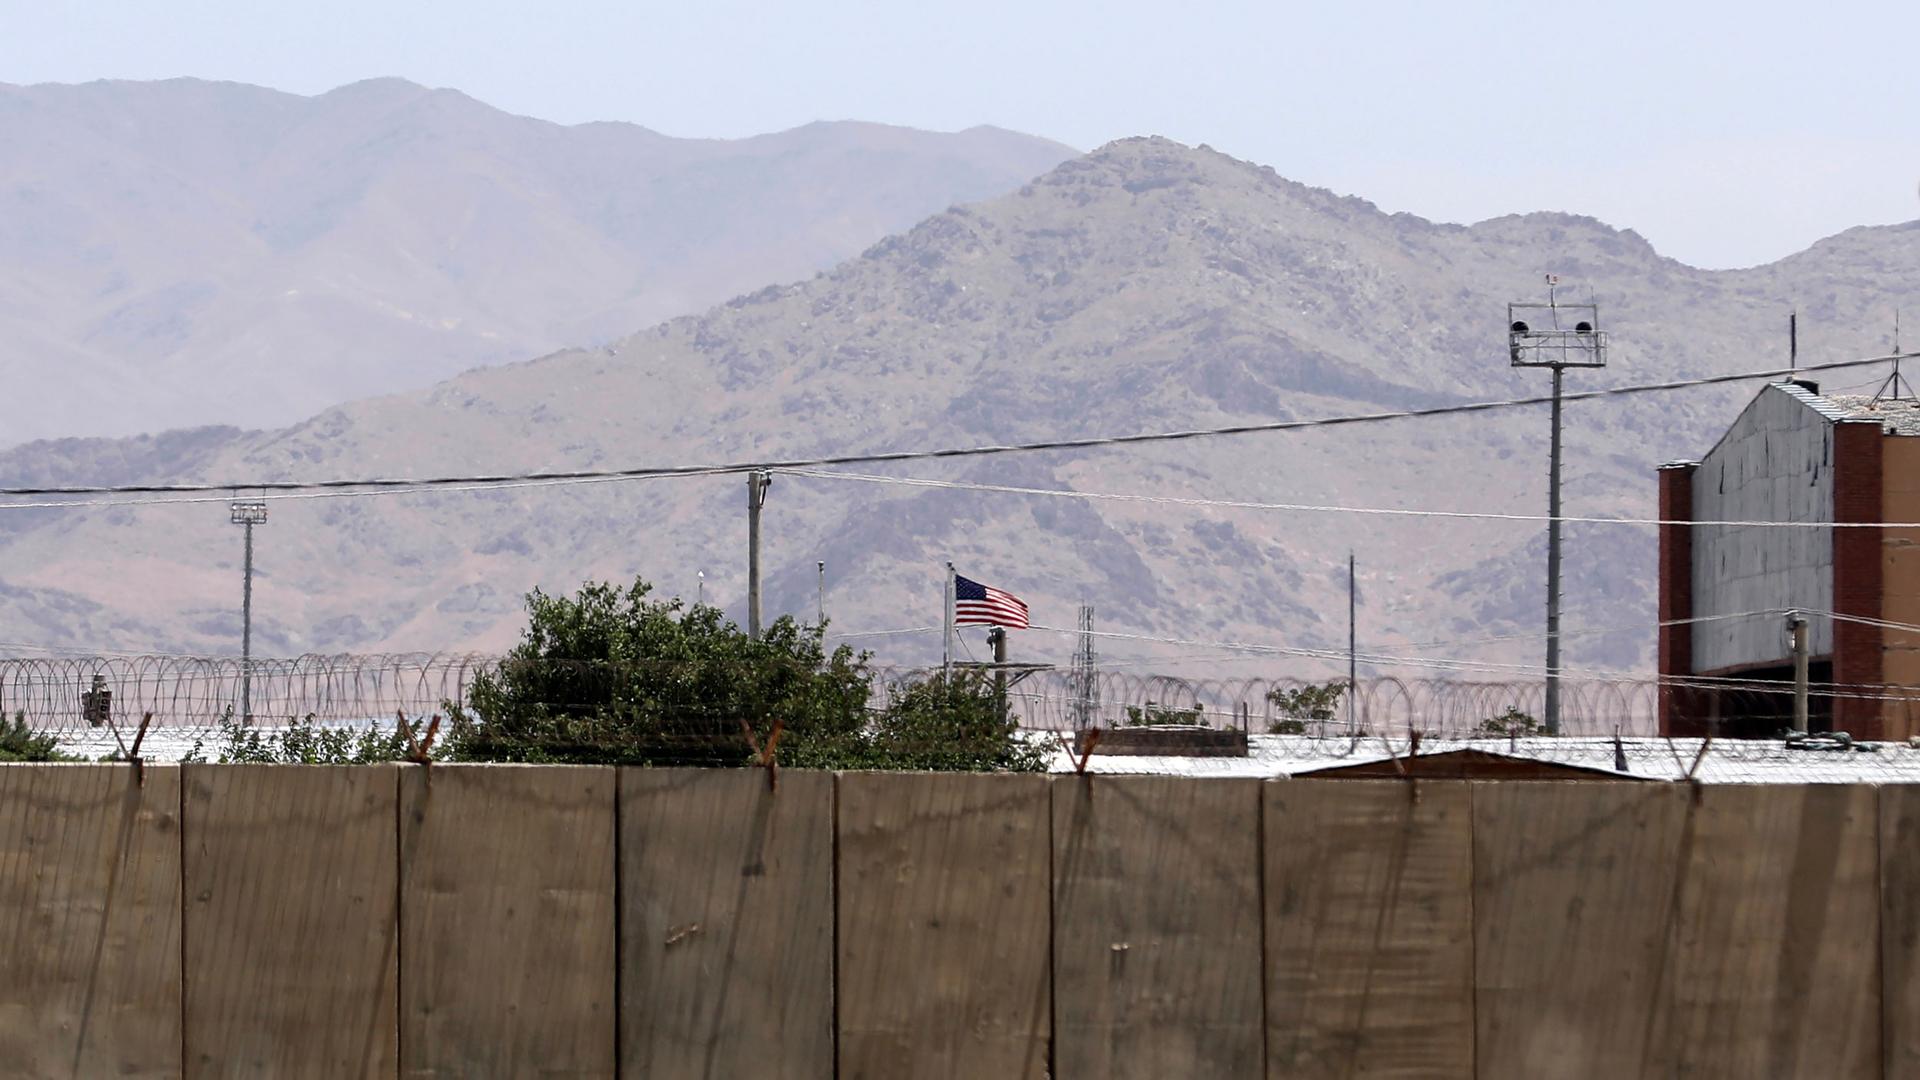 A large security wall is shown in the nearground with the US flag flying and a mountain range in the distance.